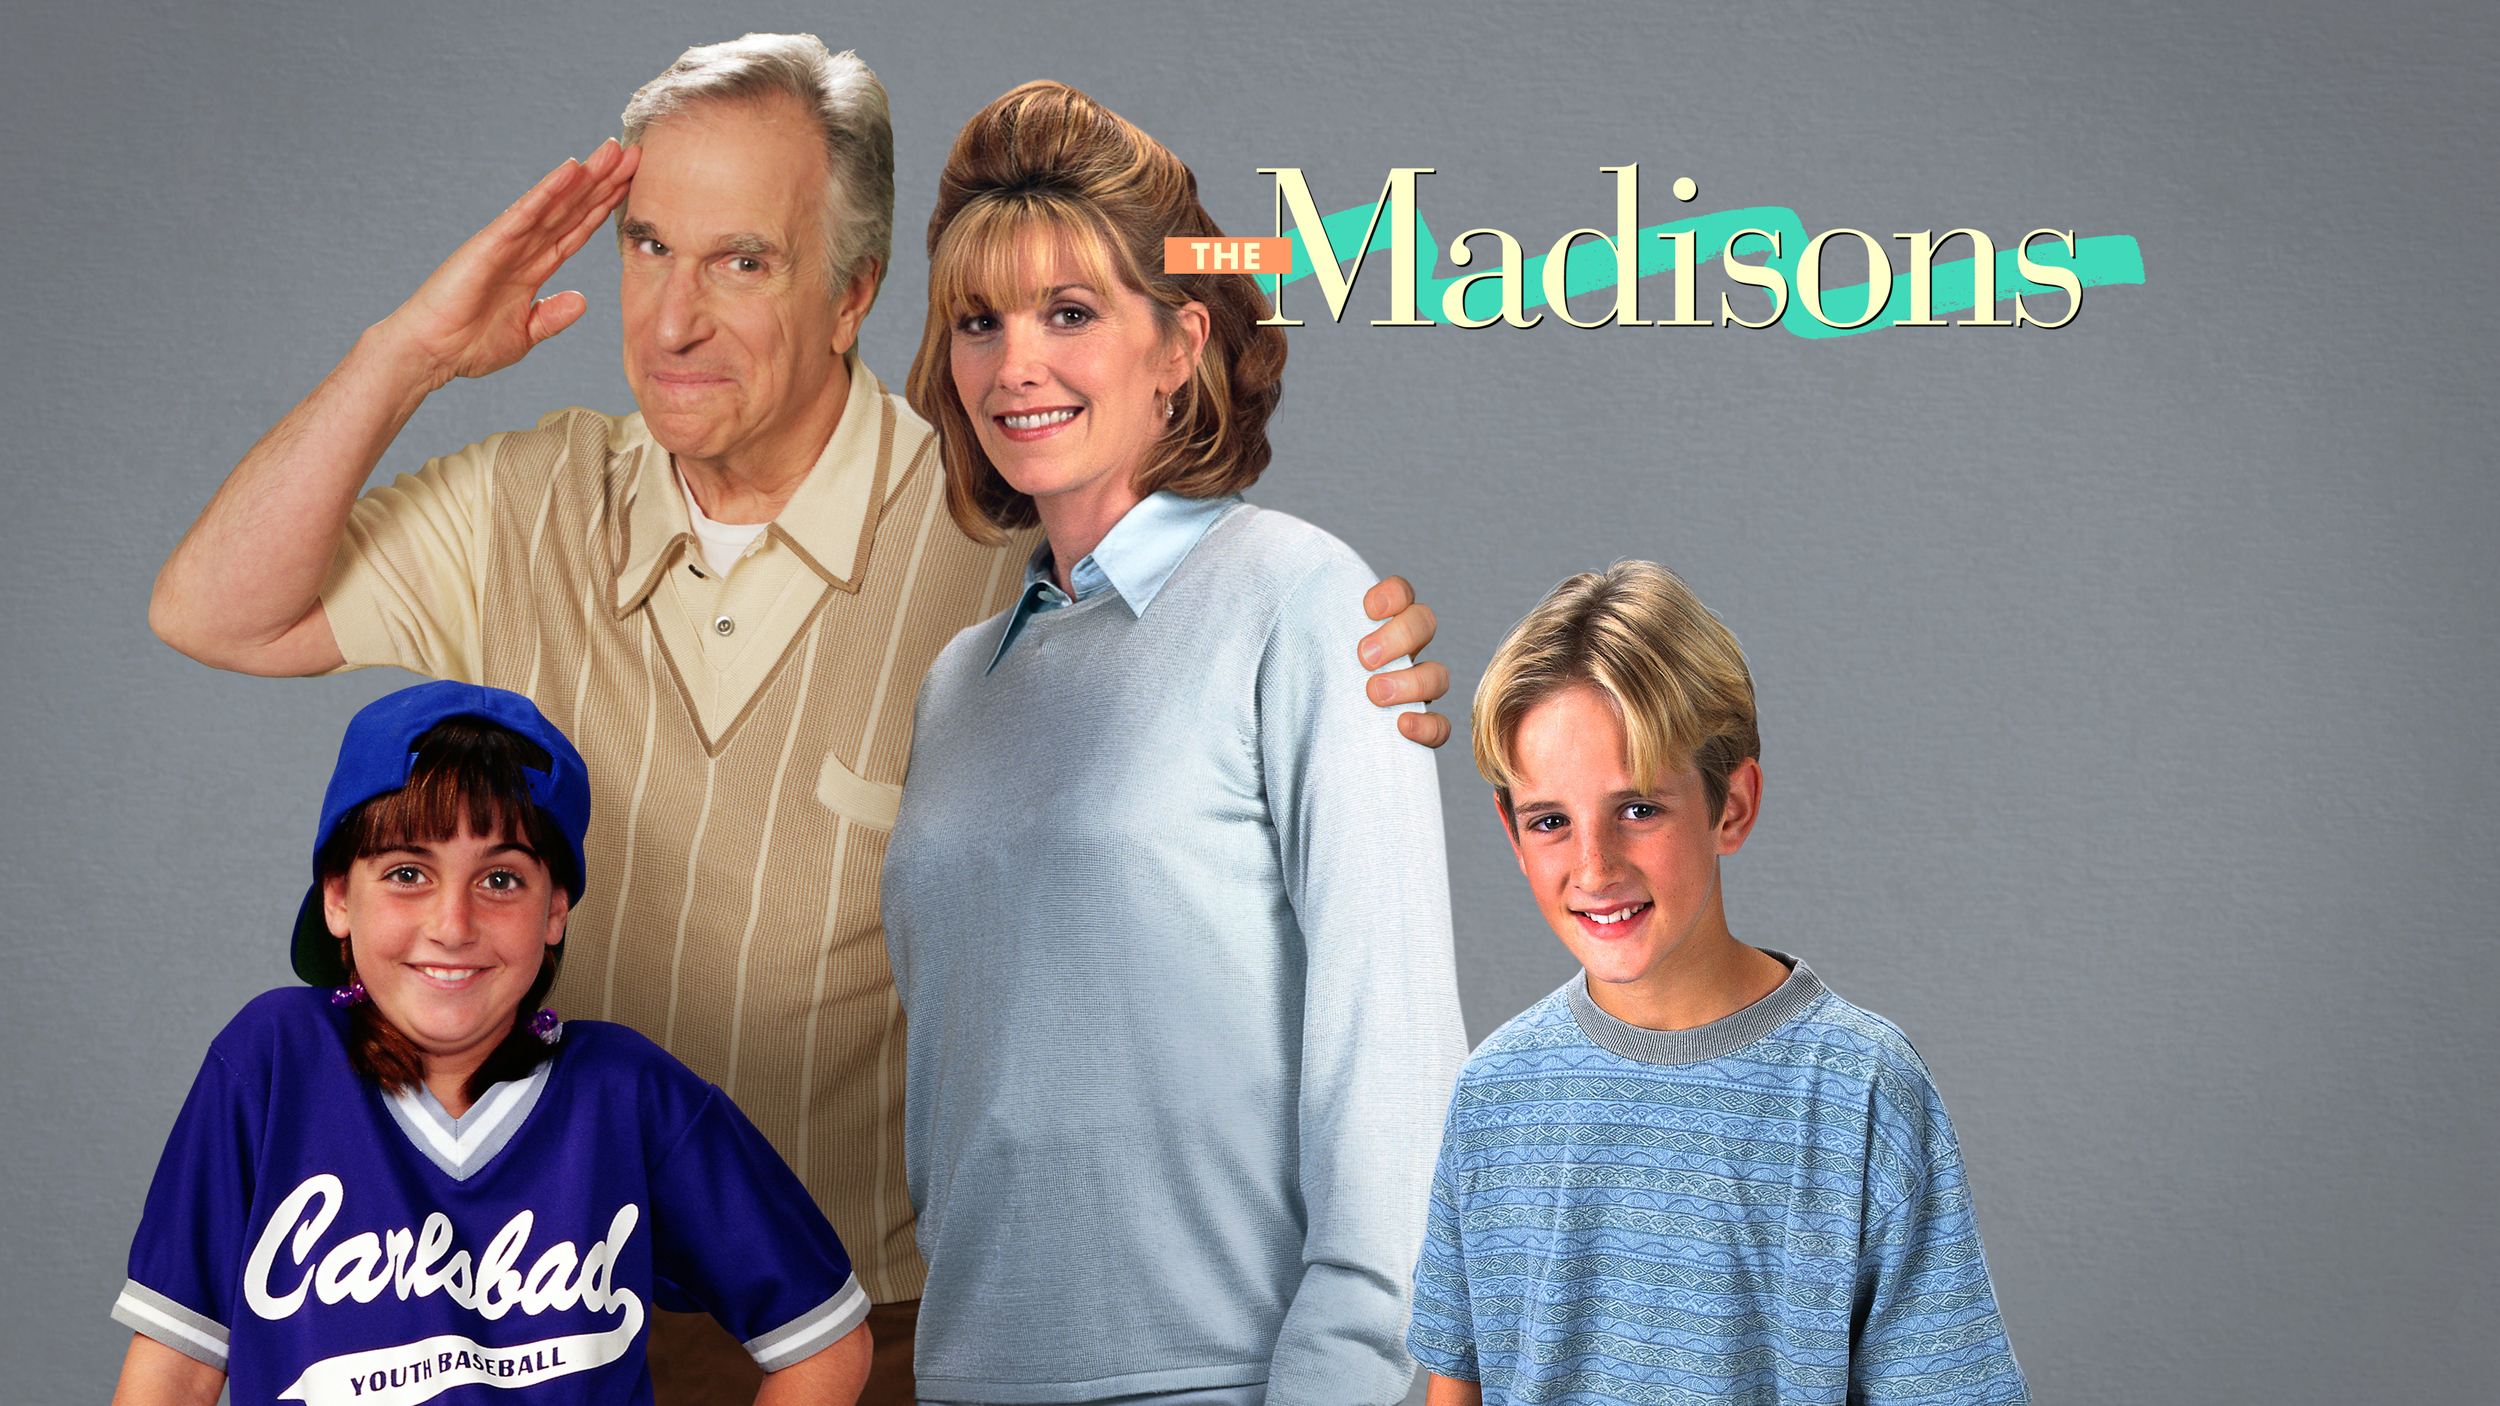 Childrens Hospital/The Madisons title card